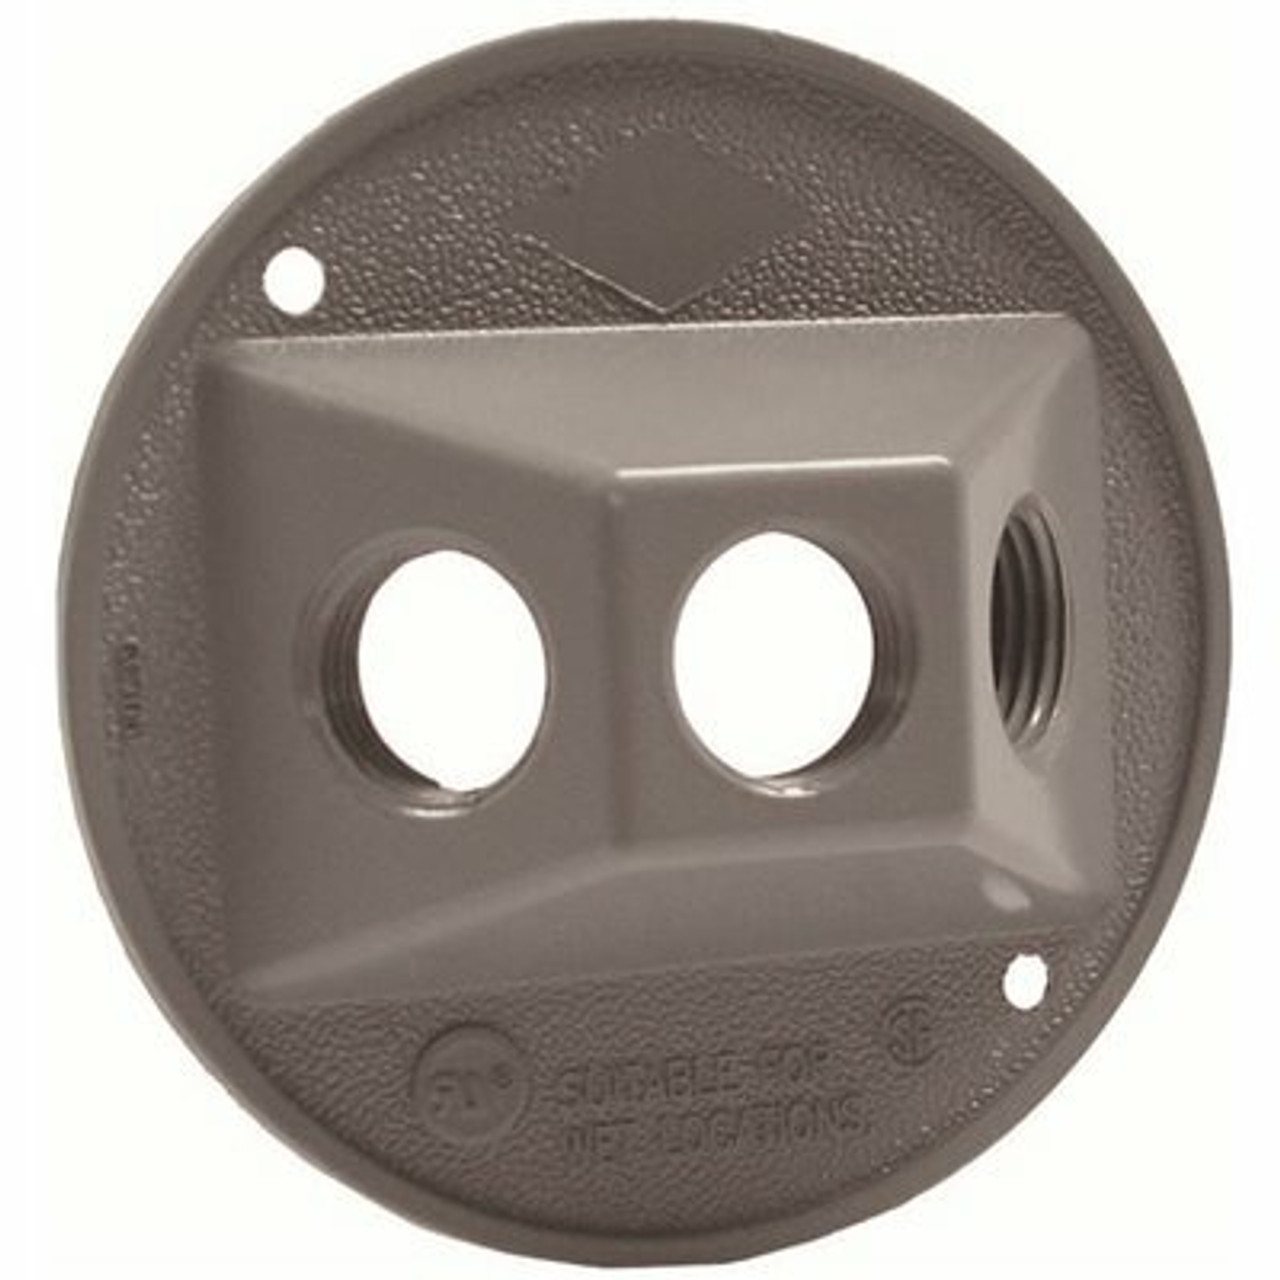 Bell Gray Round Weatherproof Cluster Cover With Three 1/2 In. Threaded Outlets